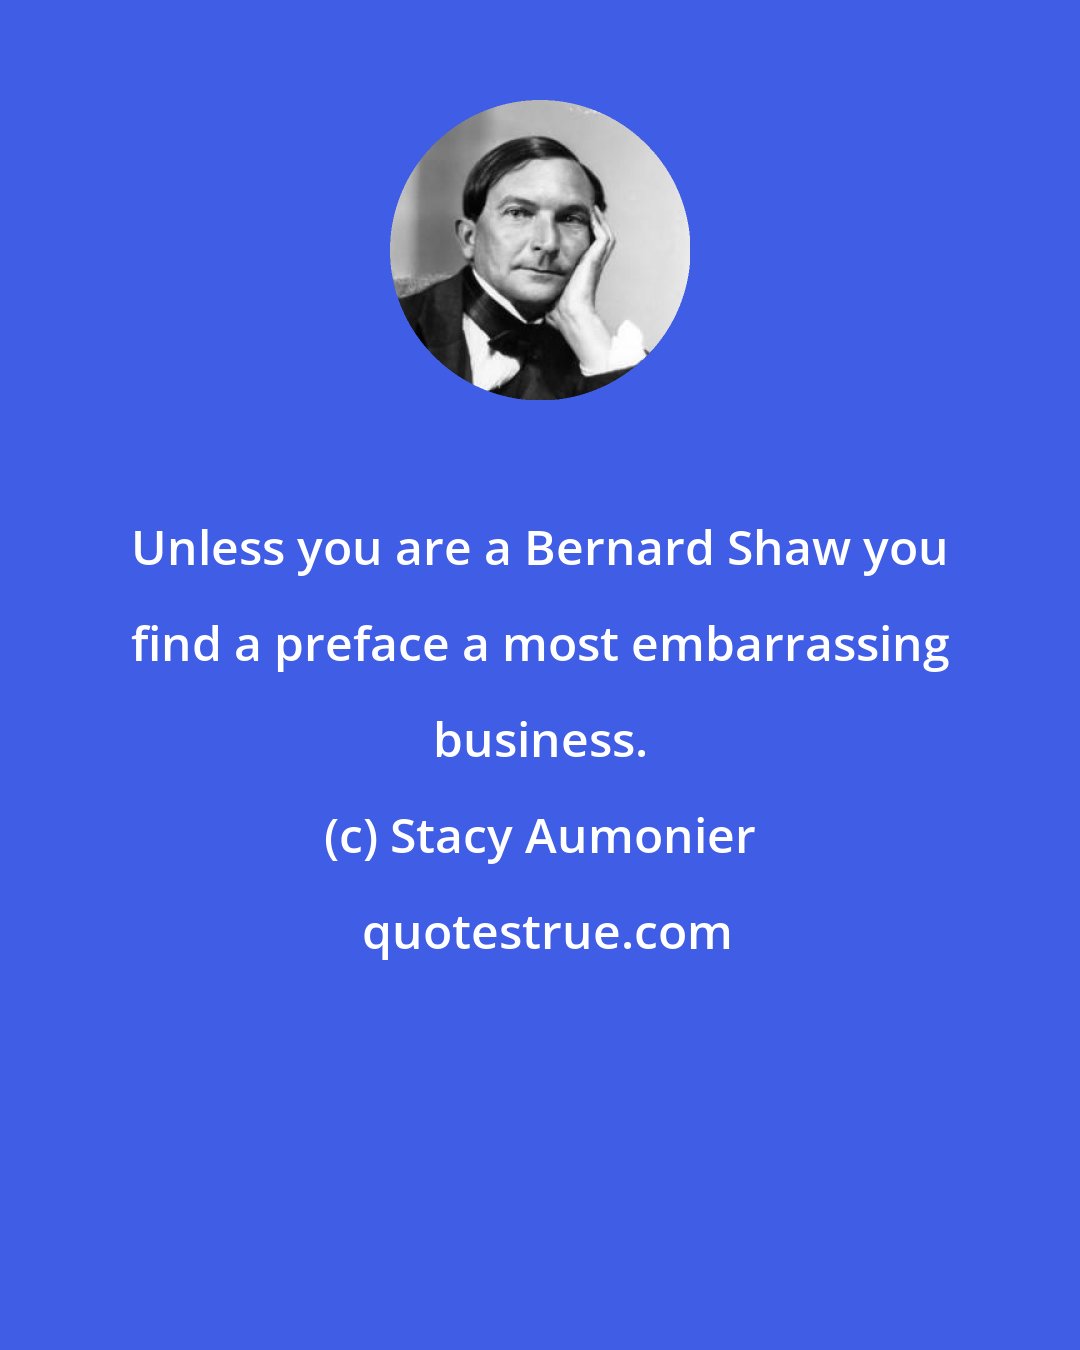 Stacy Aumonier: Unless you are a Bernard Shaw you find a preface a most embarrassing business.